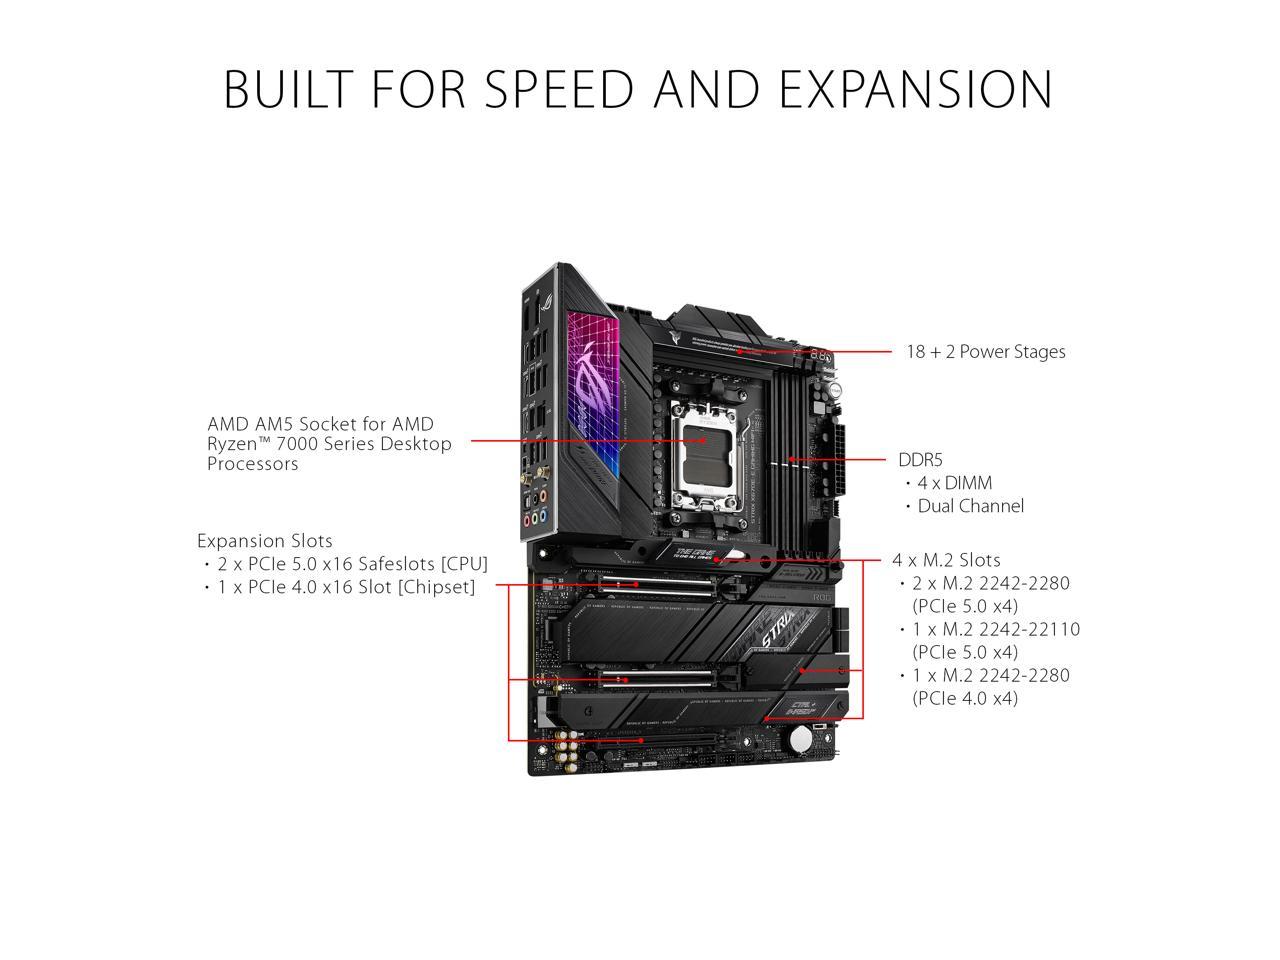 ASUS ROG STRIX X670E-E GAMING WIFI 6E Socket AM5 (LGA 1718) Ryzen 7000 ATX gaming motherboard(18+2 power stages,PCIe 5.0, DDR5 support, four M.2 slots with heatsinks, USB 3.2 Gen 2x2, WiFi 6E, AI Cooling II,PCIe Slot Q-Release, M.2 Q-Latch)